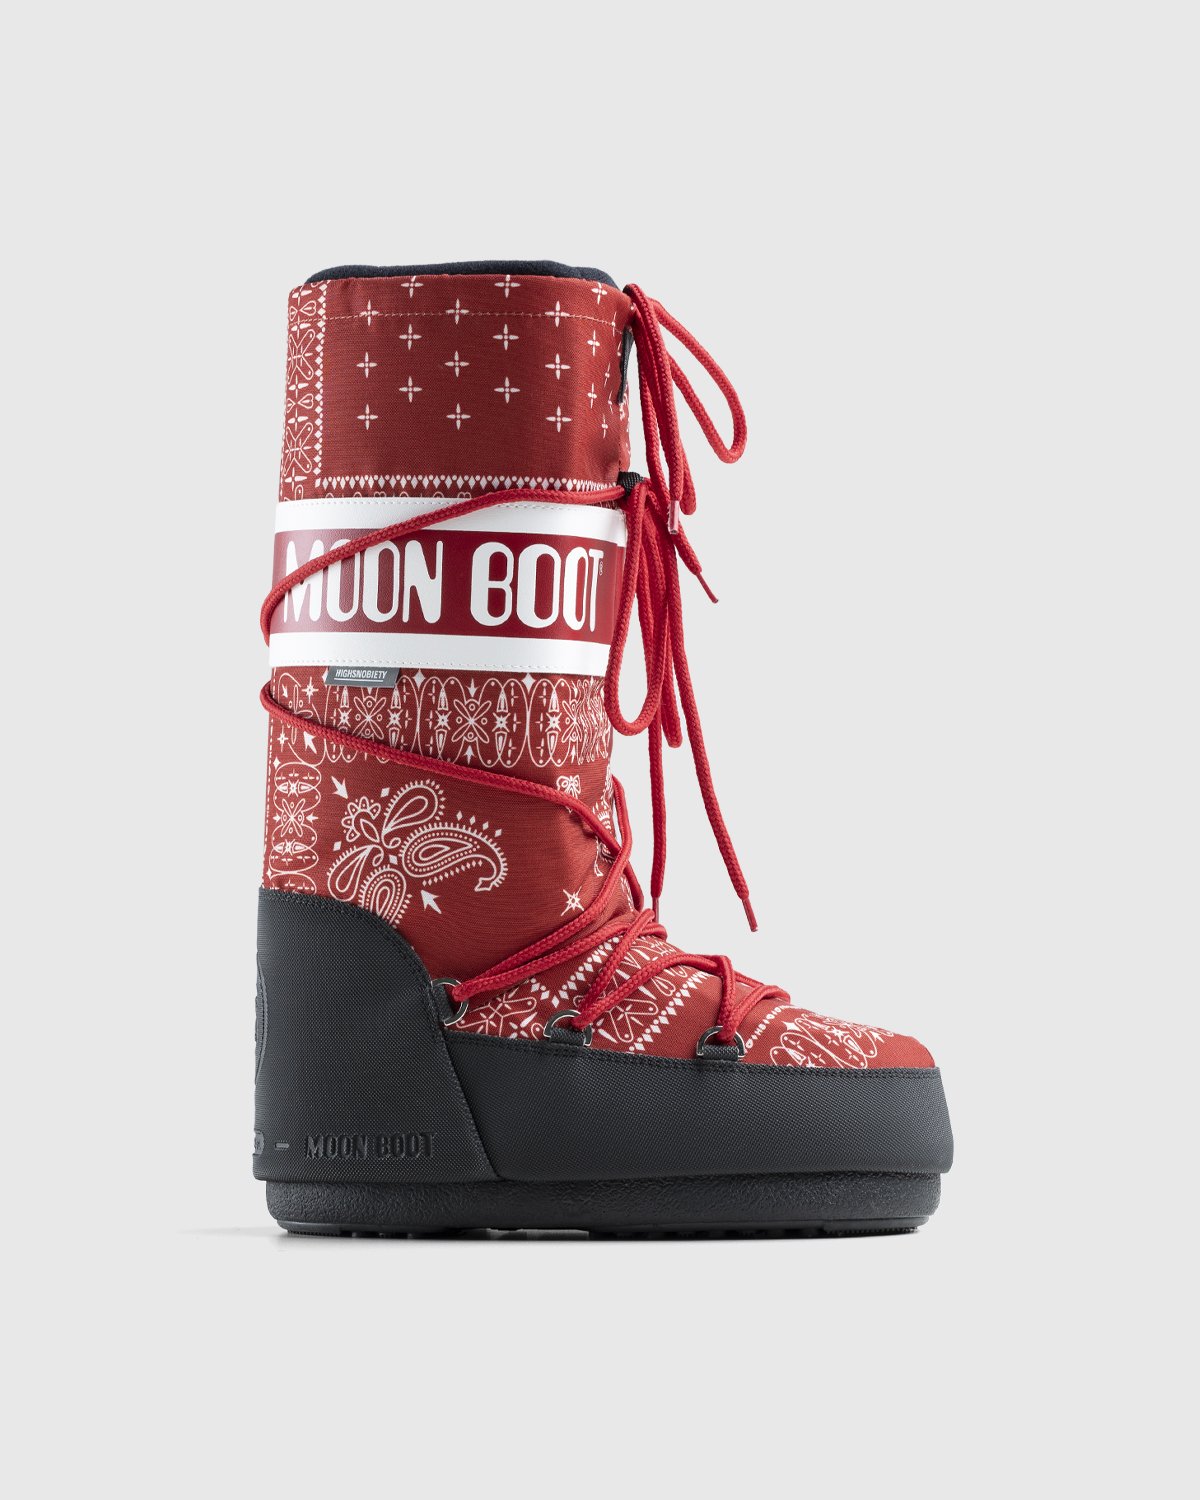 Moon Boot x Highsnobiety - Icon Boot Bandana Red - Footwear - Red - Image 1